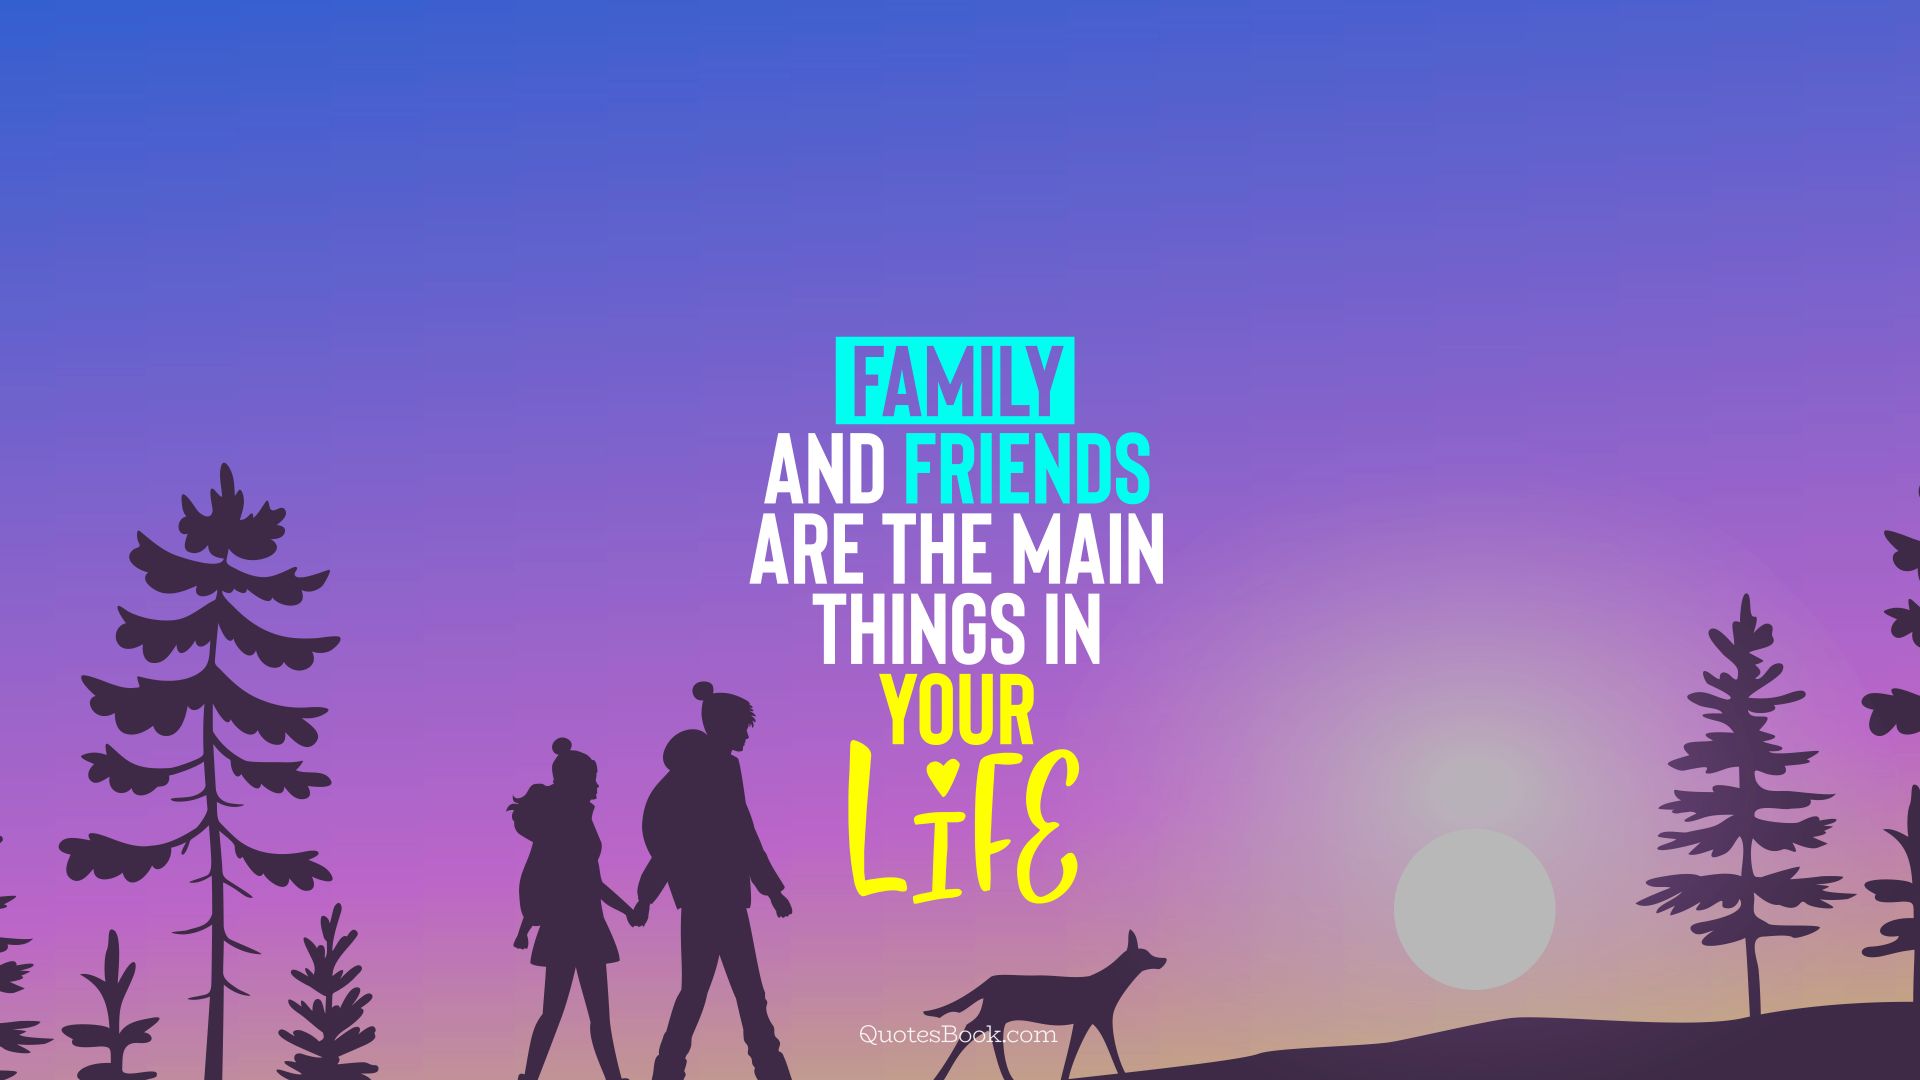 Family and friends are the main things in your life. - Quote by QuotesBook